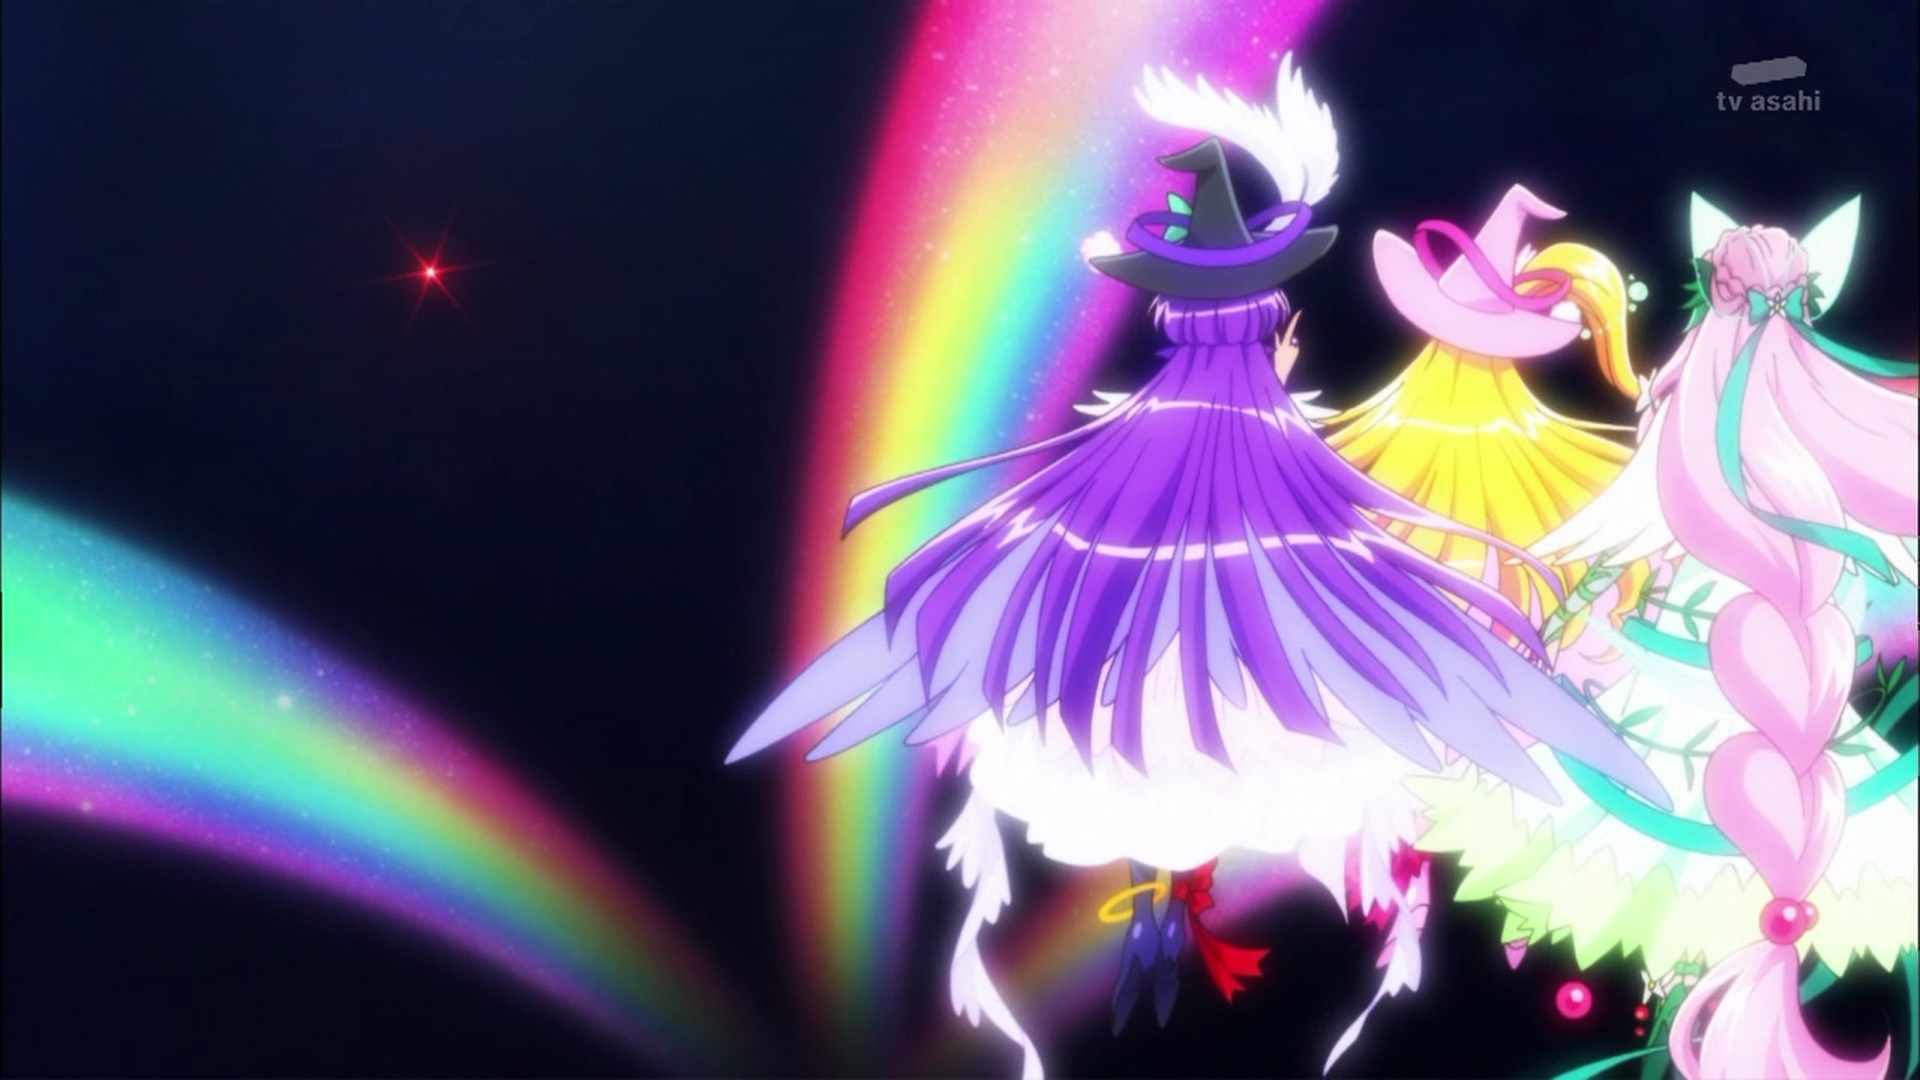 Wizards Are Among Us!: Maho Girls Precure